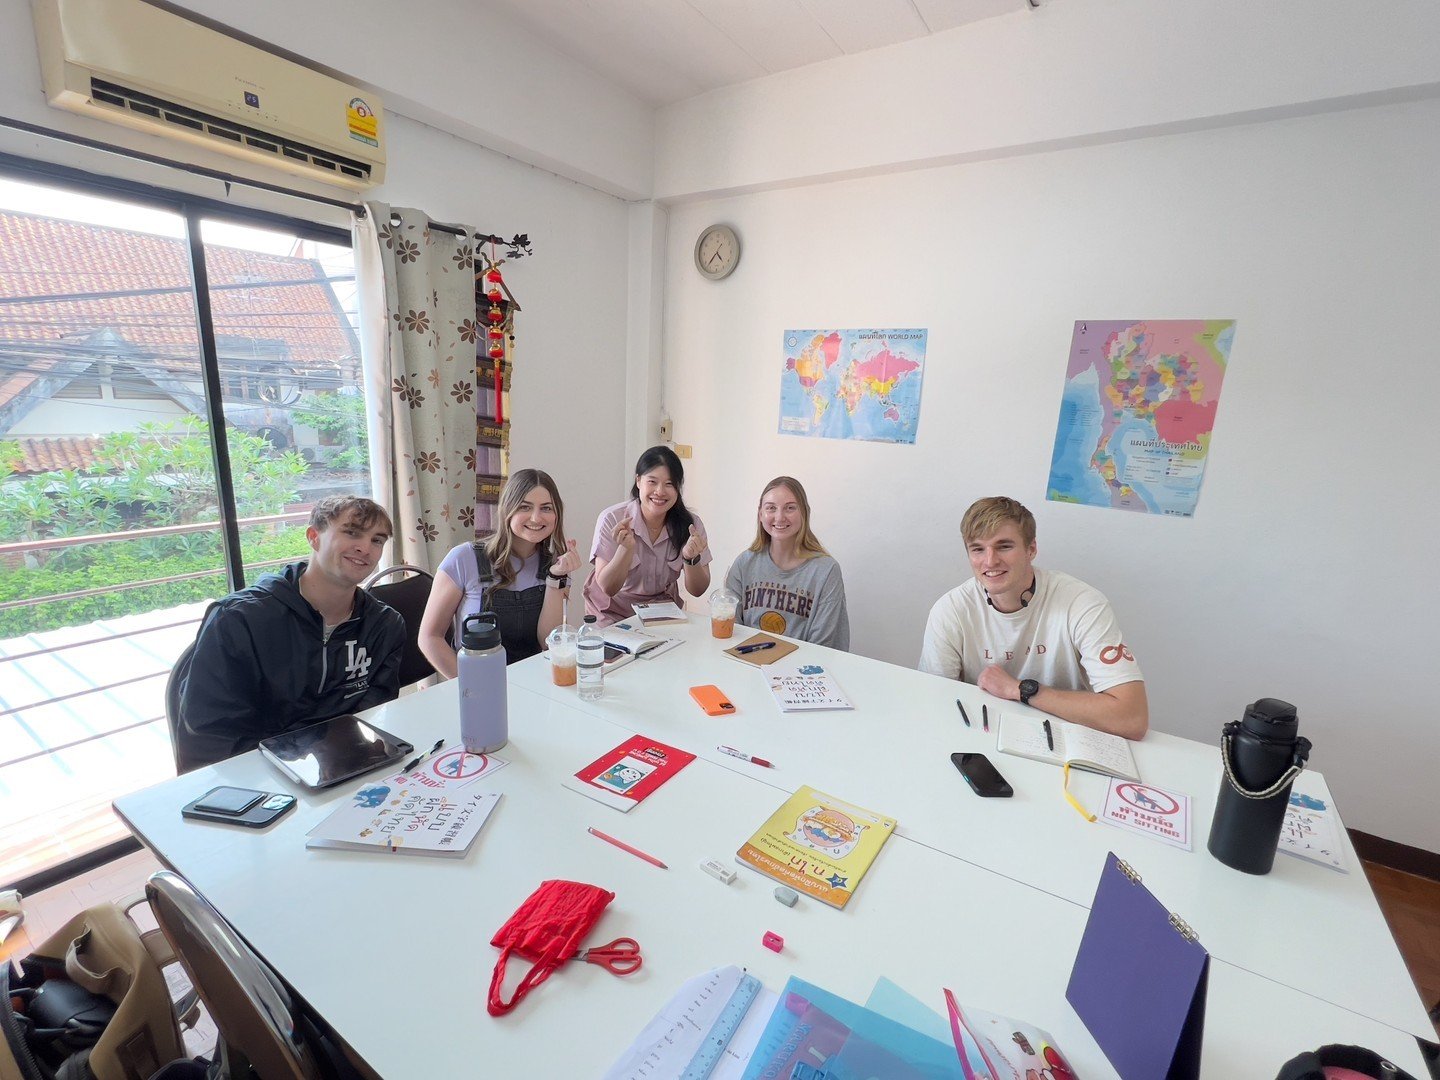 Check out our eager learners!🤓📚 LEAD staff @brooklynbehrends @katie.rhodes @shellier_12 and @dylan_floyd11 are hard at work in language school, driving school, campus investigation, and jumping here first into everything else Chiang Mai has to offe